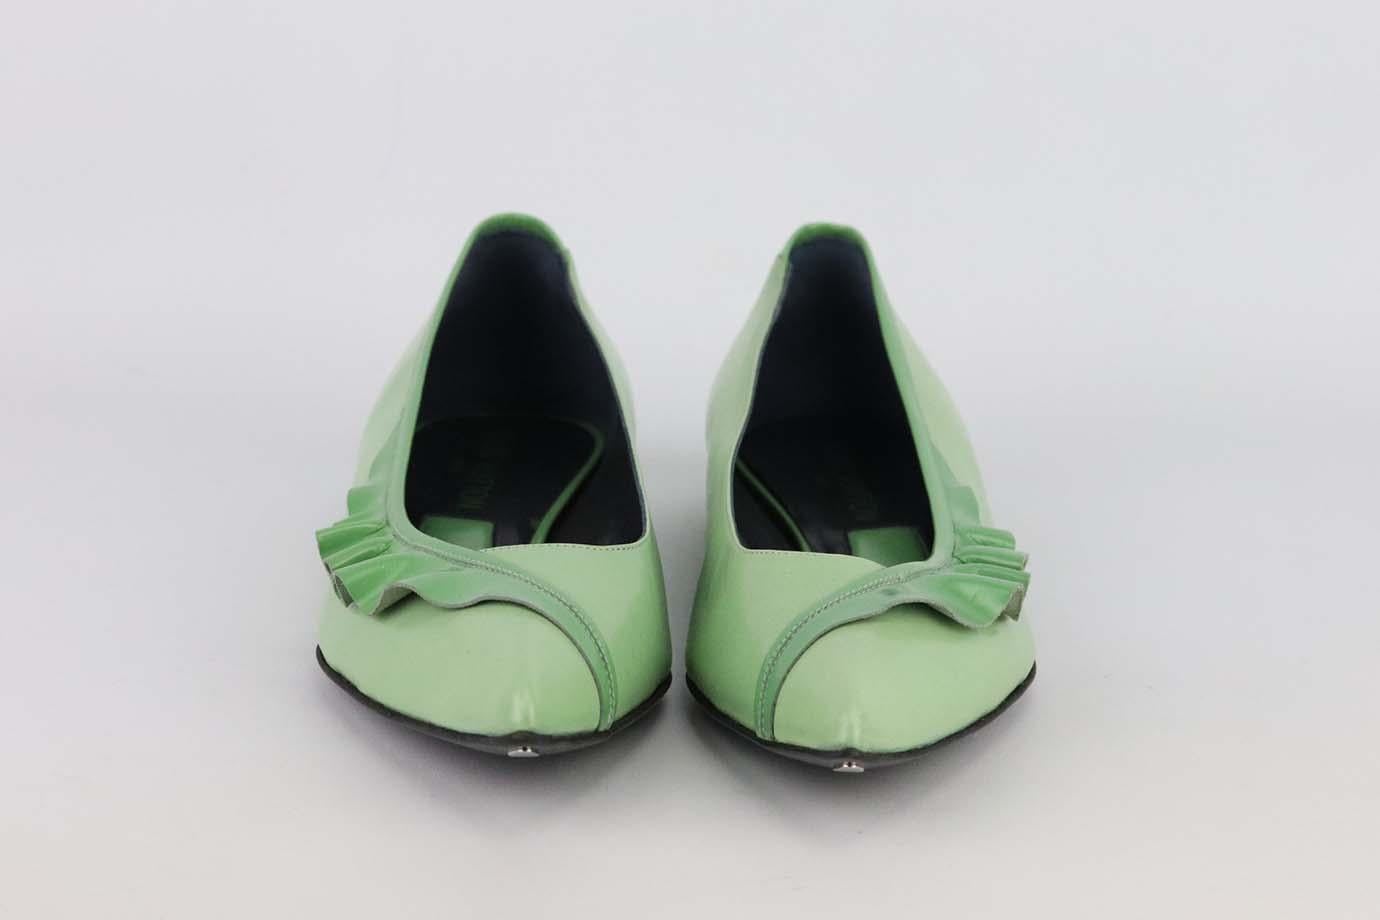 These ballerina flats by Louis Vuitton are a classic style that will never date, made in Italy from green leather, they have sharp pointed toes with ruffle trim. Heel measures approximately 10 mm/ 0.4 inches. Green leather. Slips on. Does not come